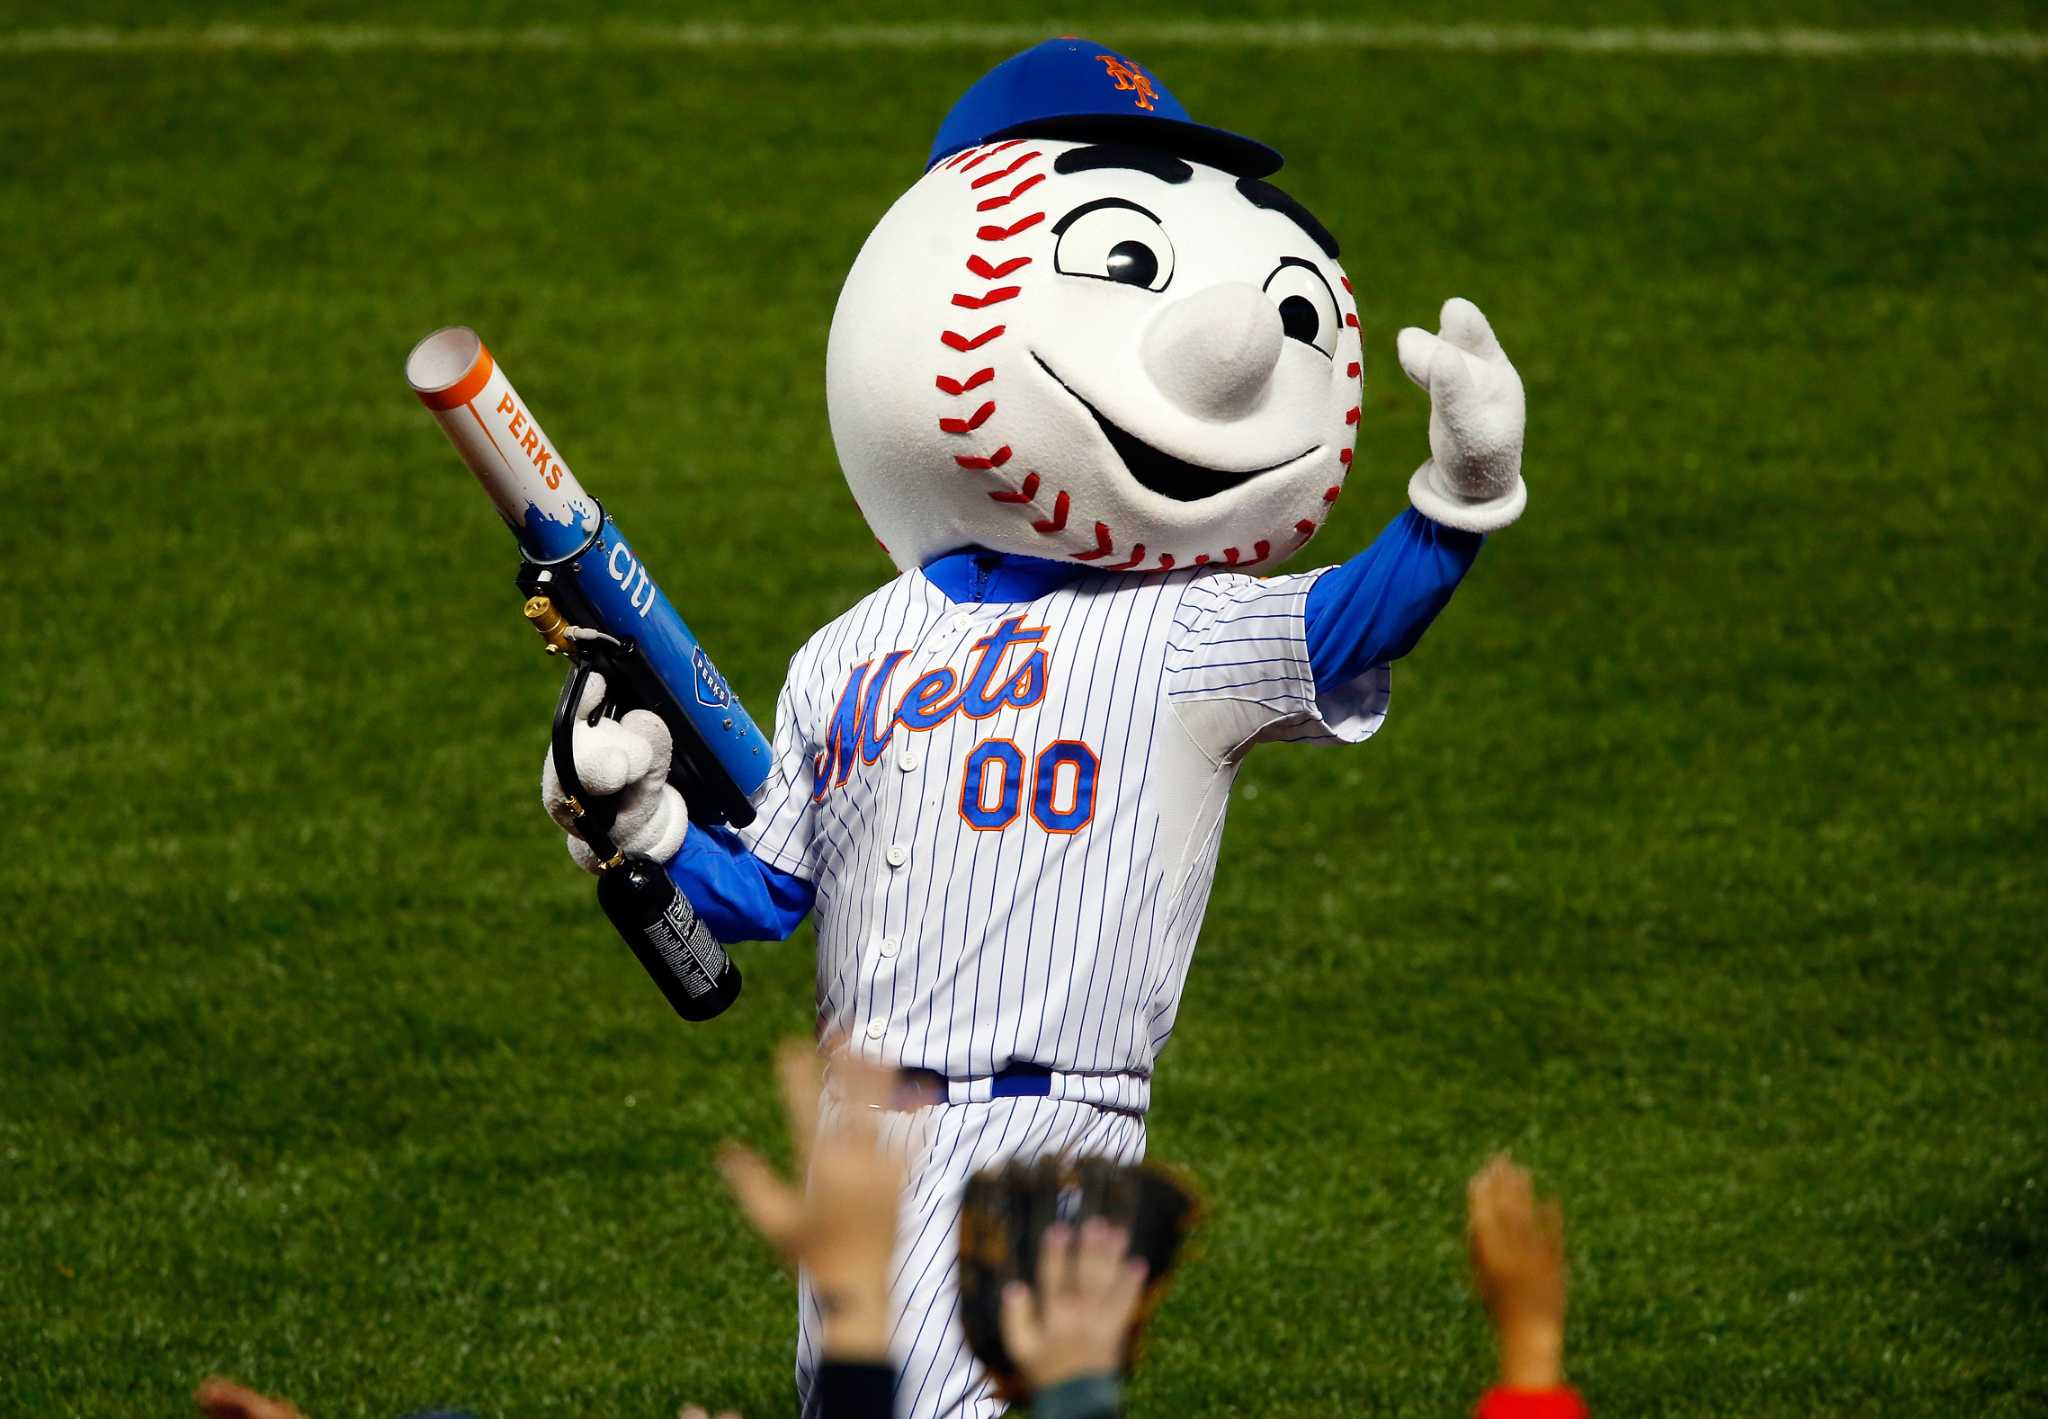 Mr. and Mrs. Met got divorced in real life.  Ny mets baseball, New york  mets baseball, Mets baseball